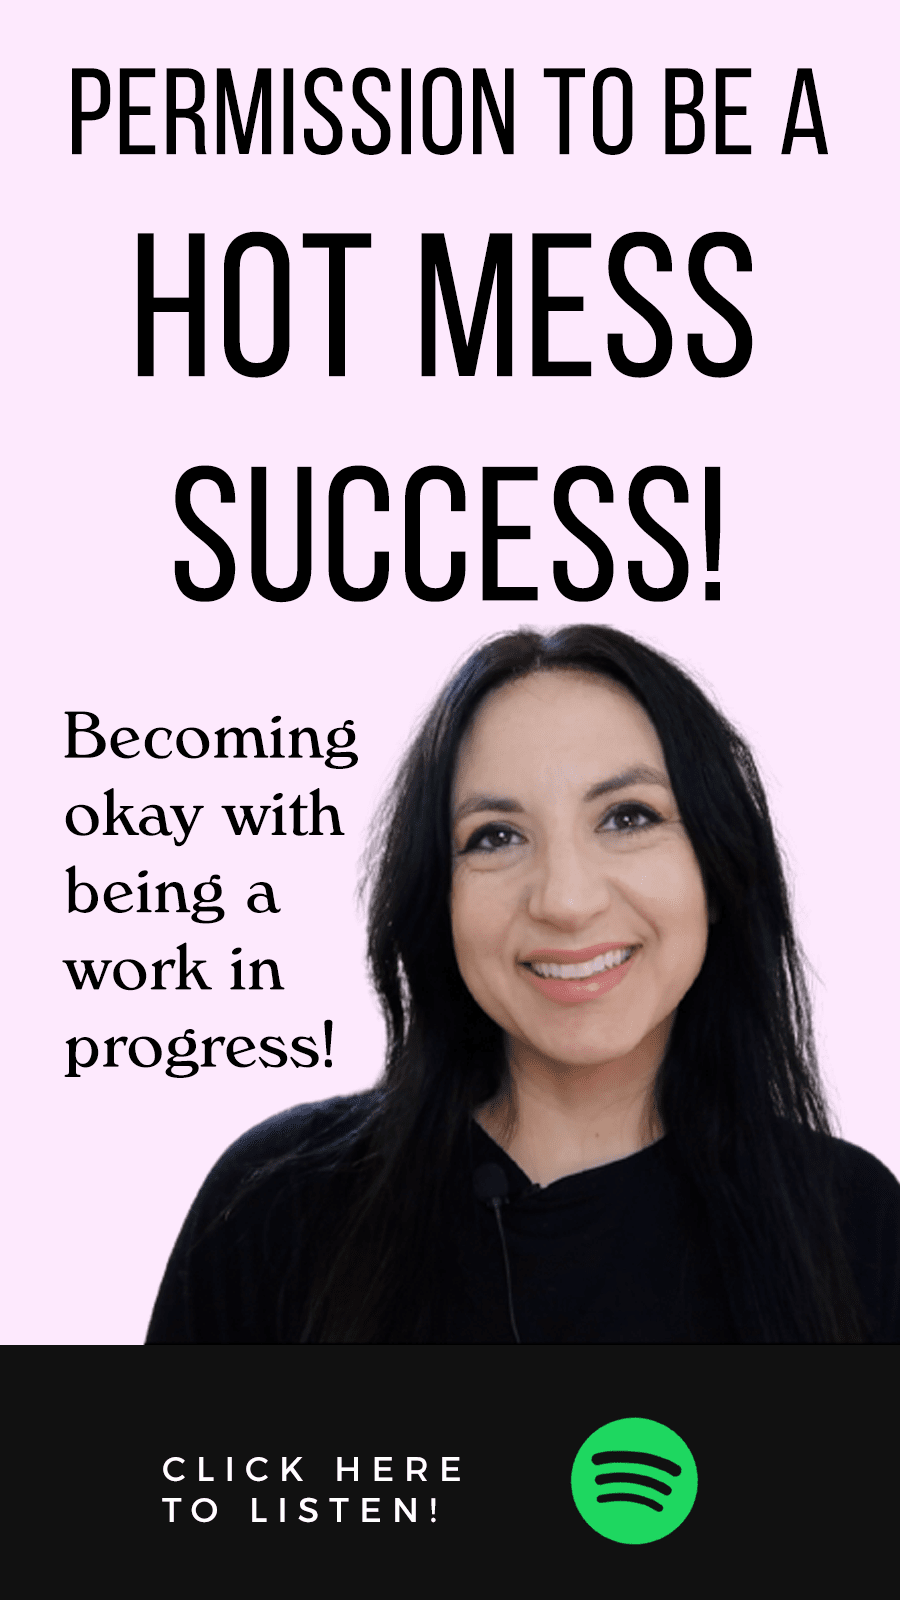 Jenn Stevens with text Permission To Be A Hot Mess Success!